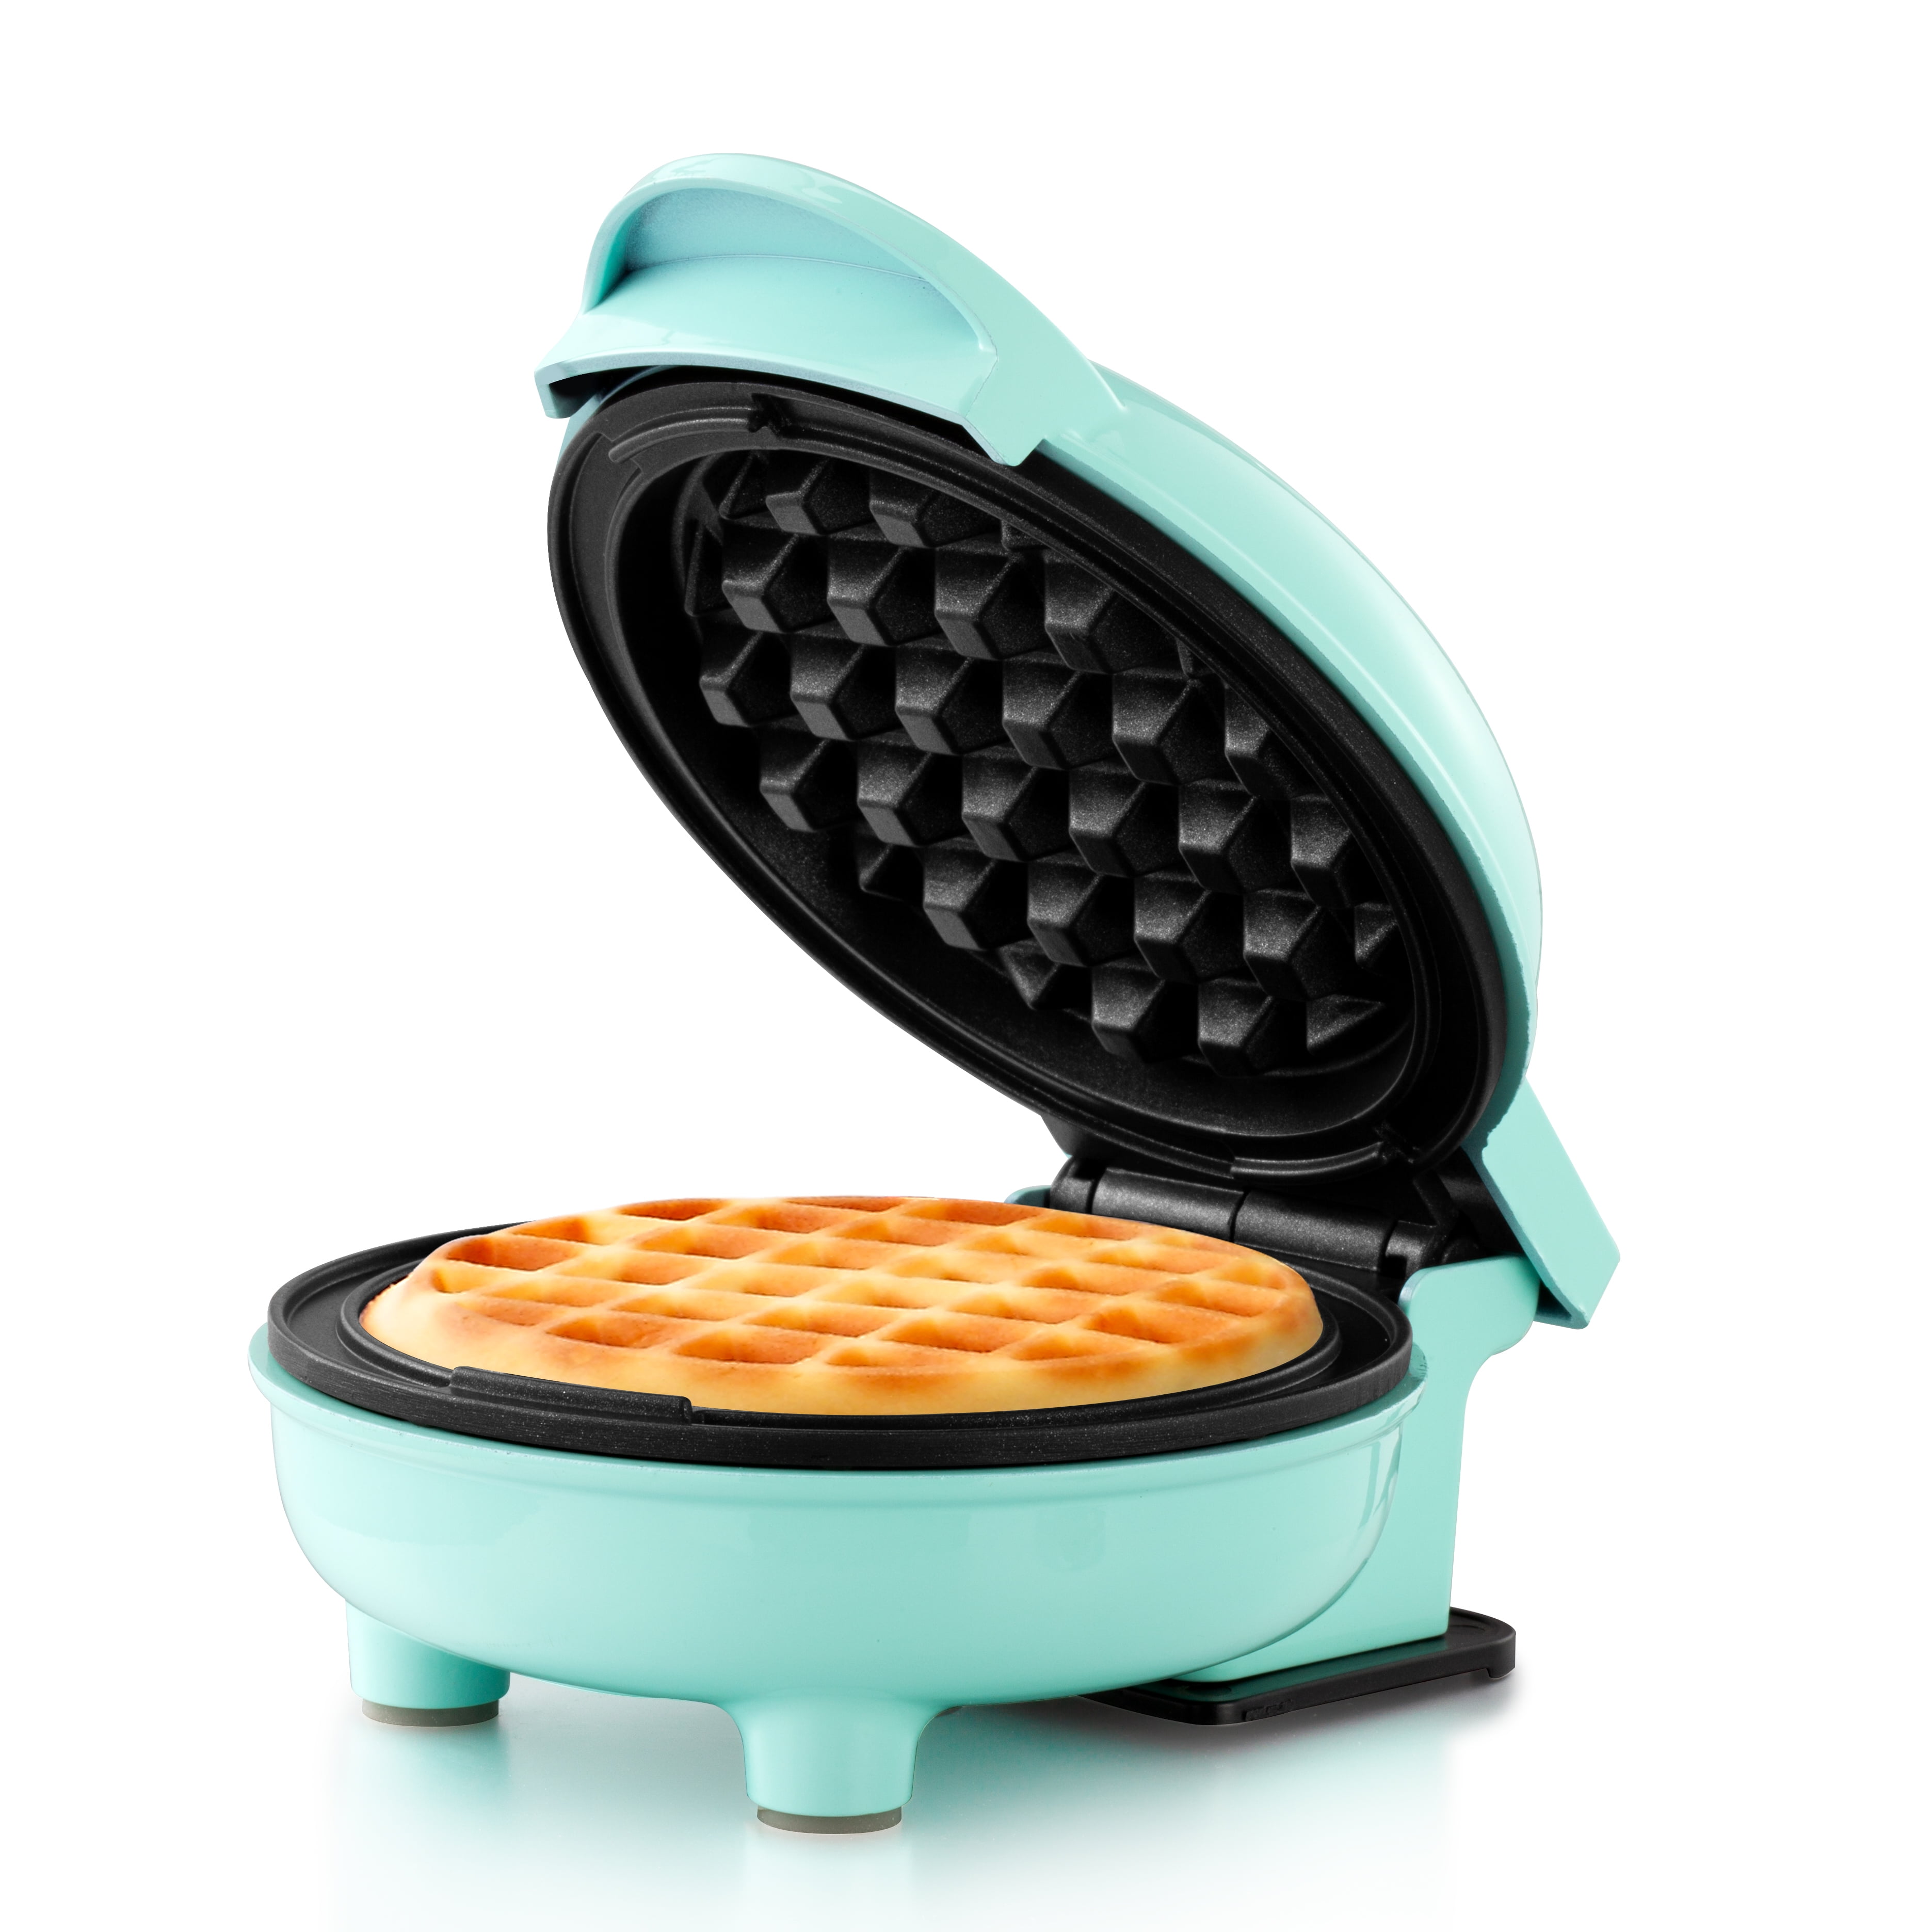 Holstein Housewares Personal/Mini Waffle Maker, Non-Stick Coating, Mint -  4-inch Waffles in Minutes 